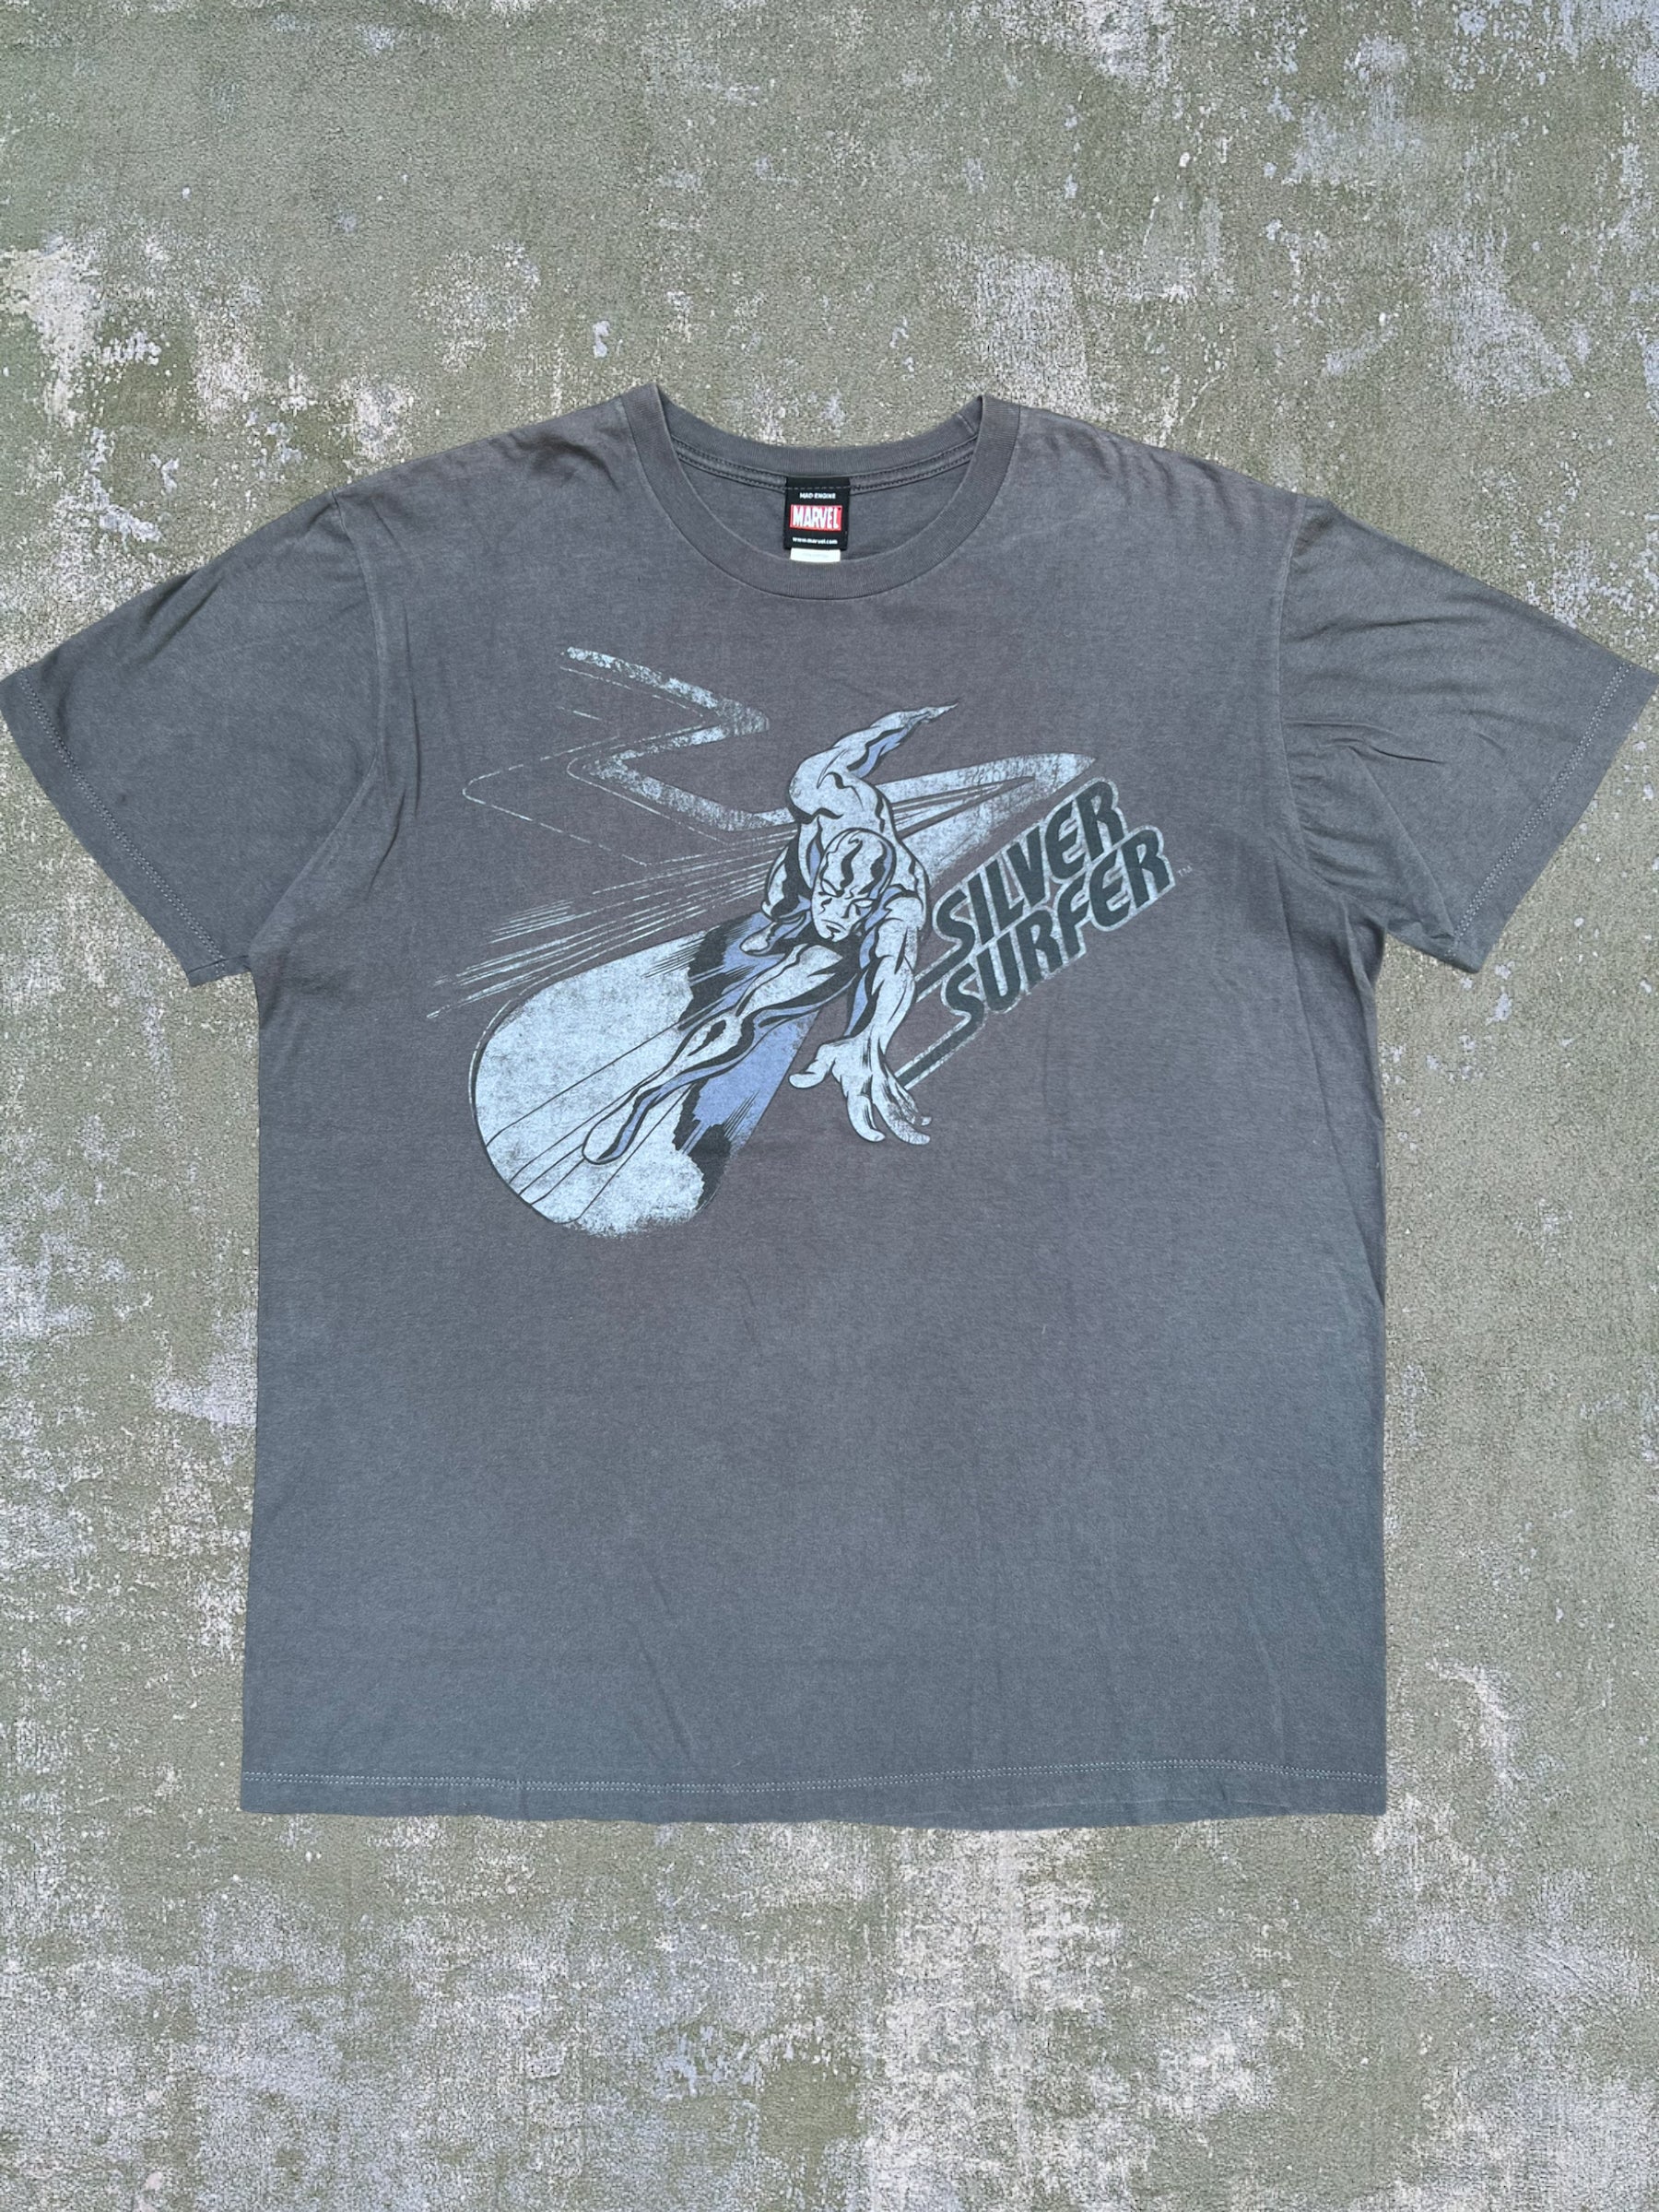 2000s Marvel Silver Surfer Tee (XL)